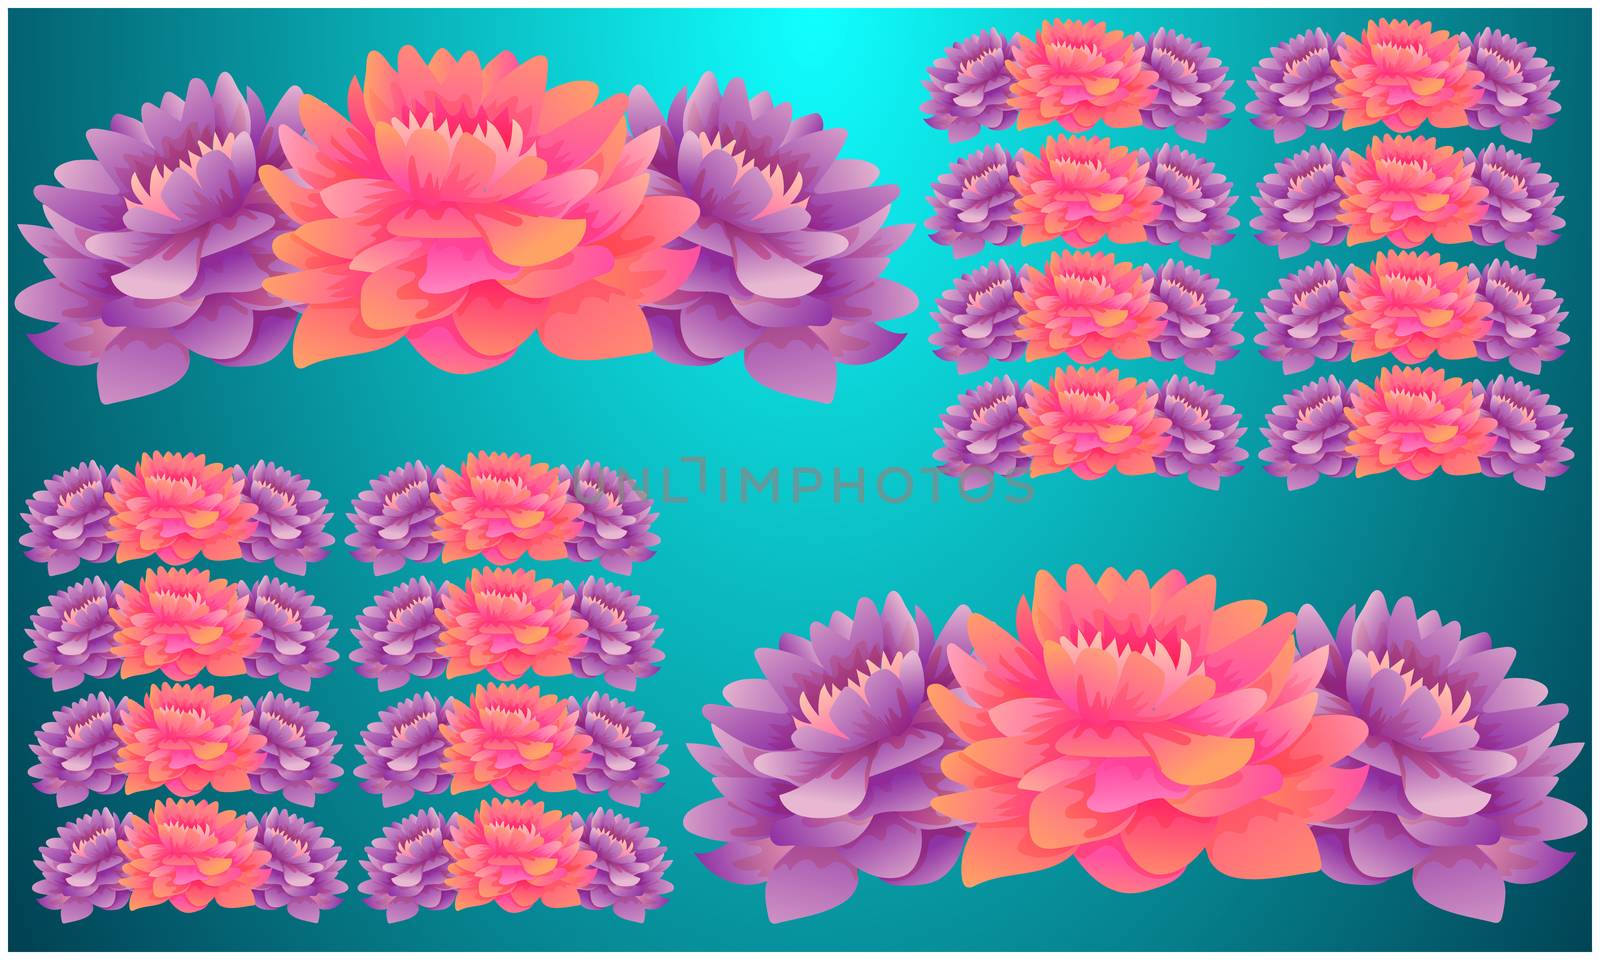 Digital Textile design of flowers on abstract background by aanavcreationsplus